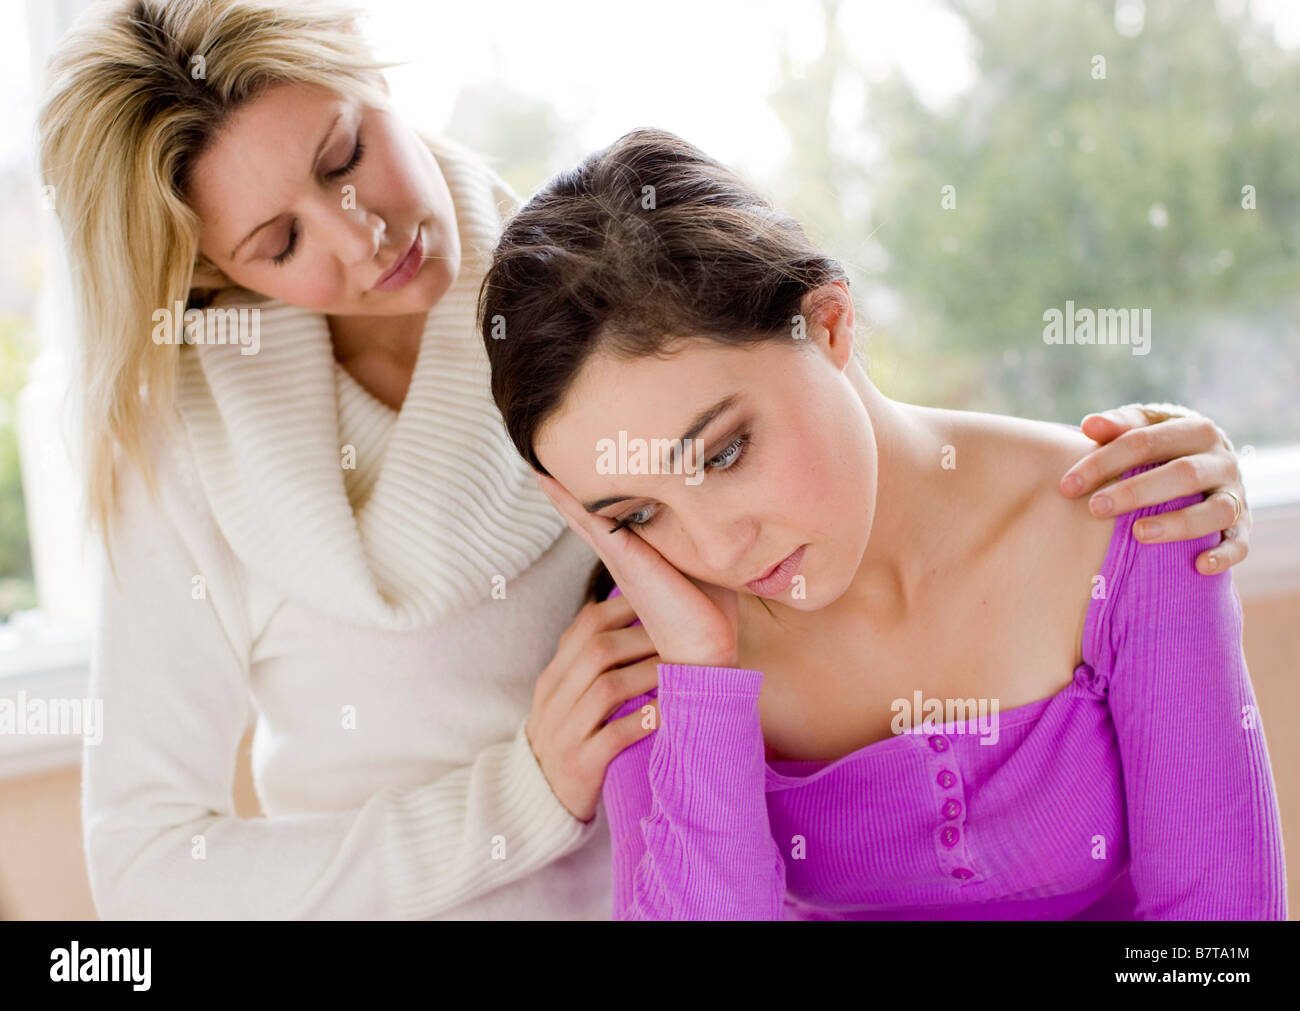 Mother consoling daughter Stock Photo